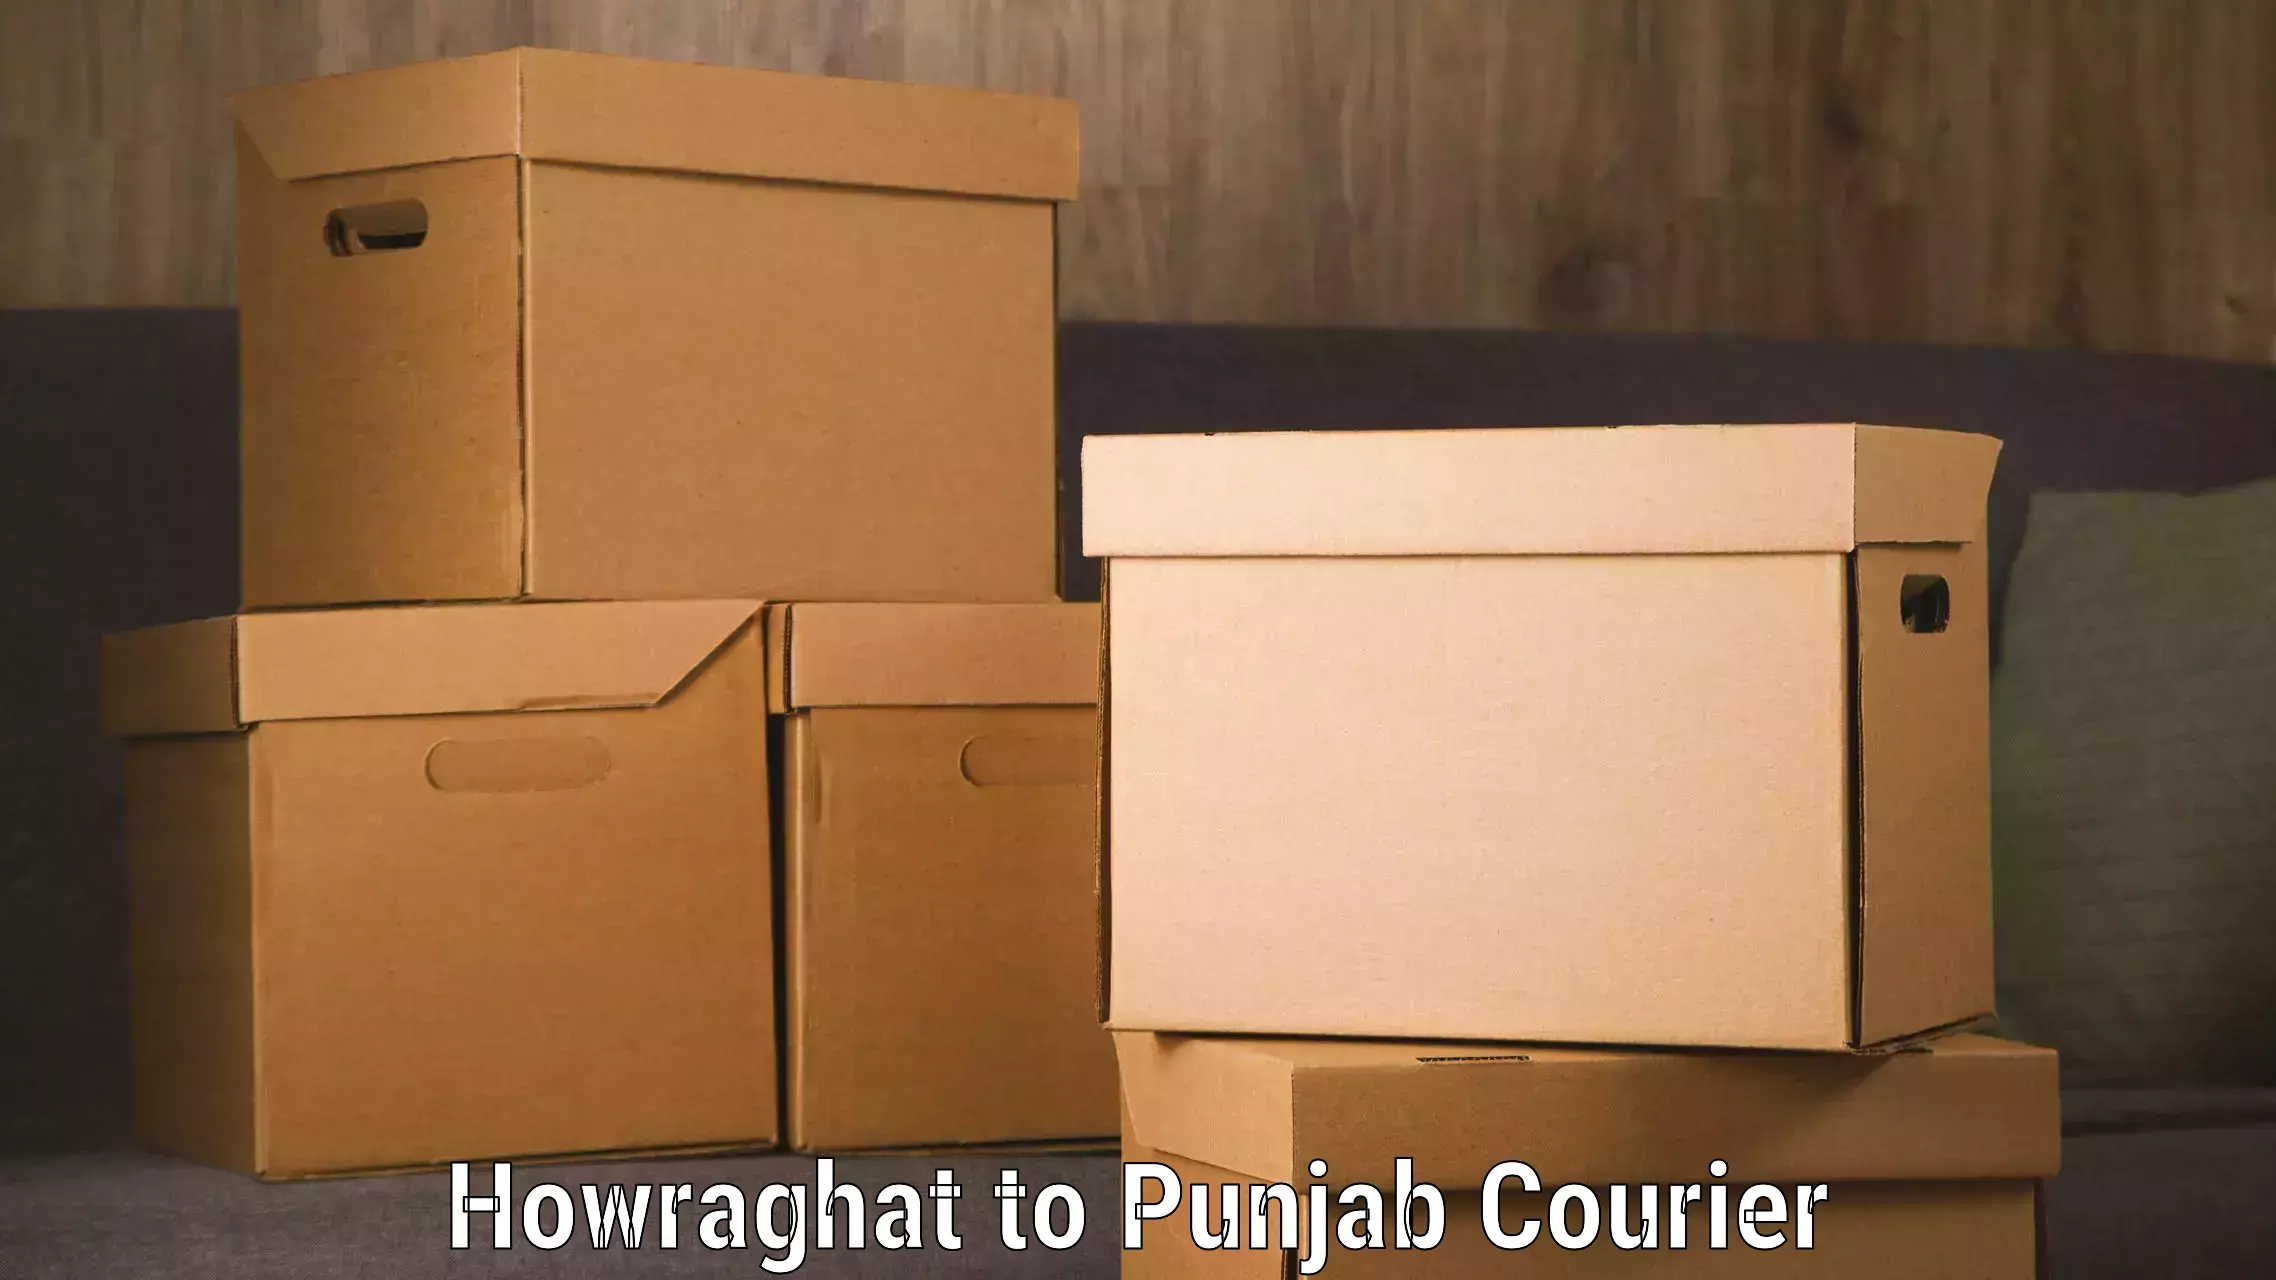 Overnight luggage courier Howraghat to Sultanpur Lodhi